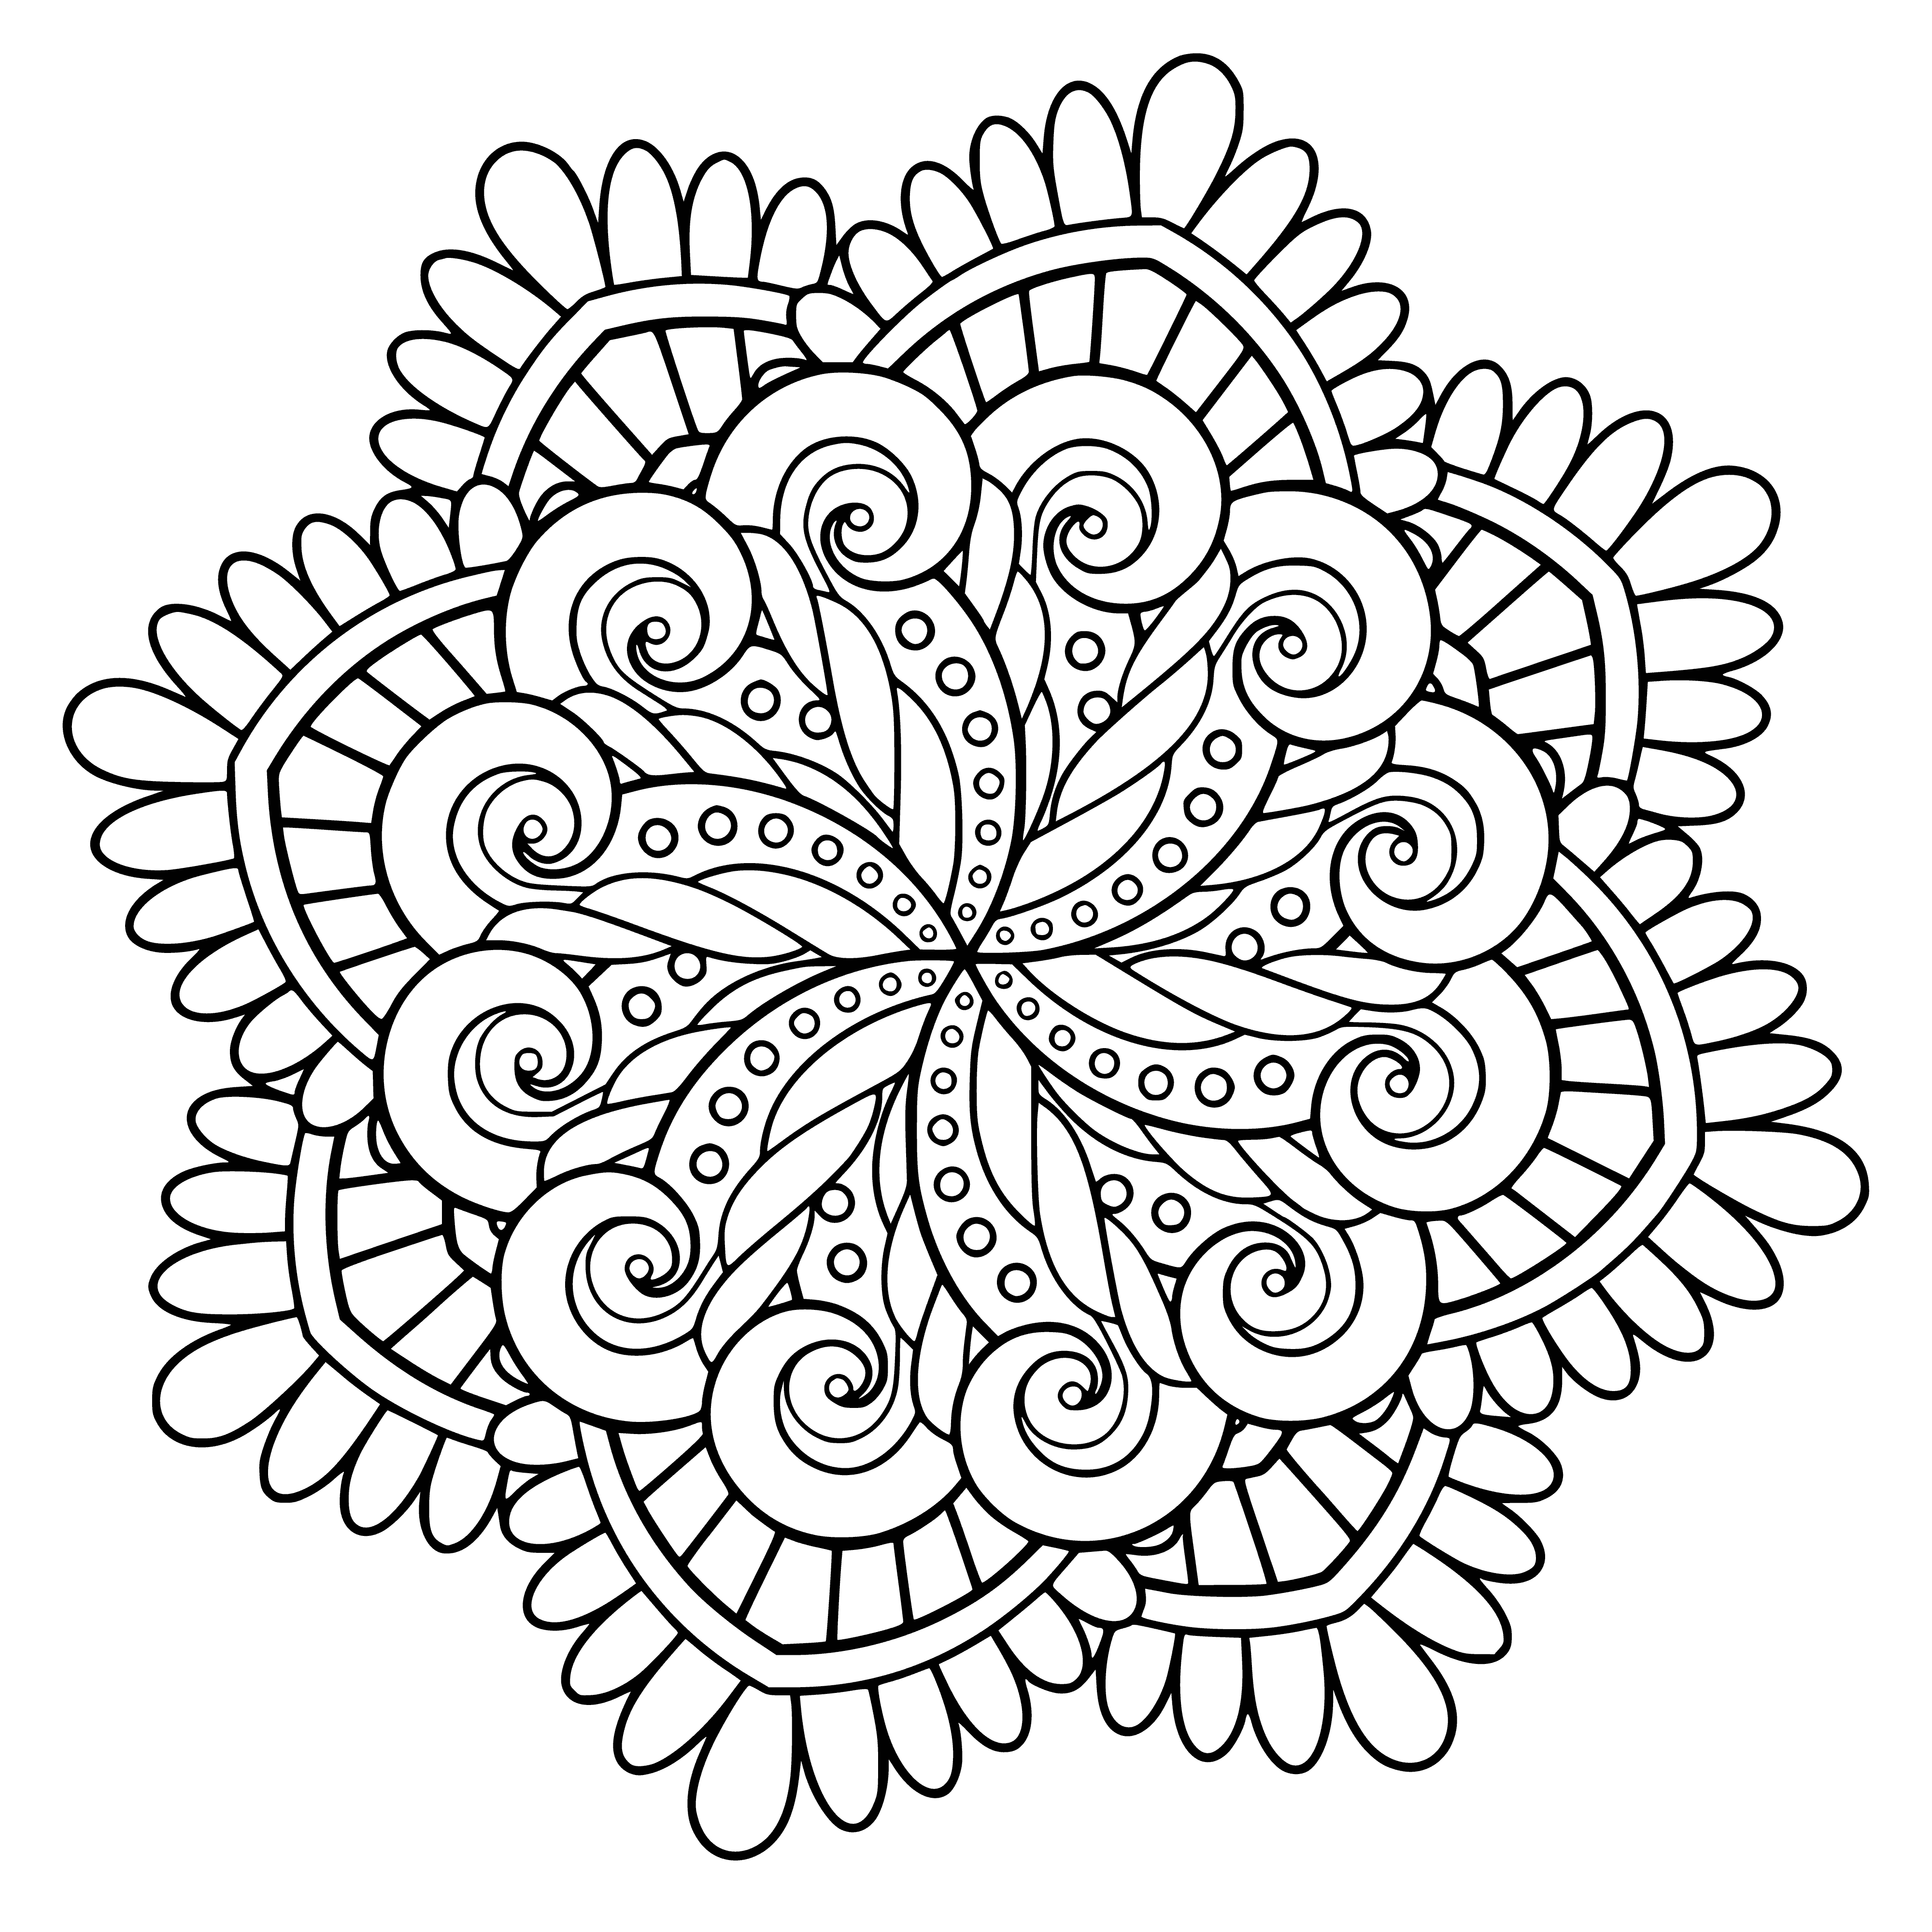 coloring page: Person sits at table, coloring in a mandala with a blue crayon from a box of crayons. Imagining the intricate symmetry of white & color.